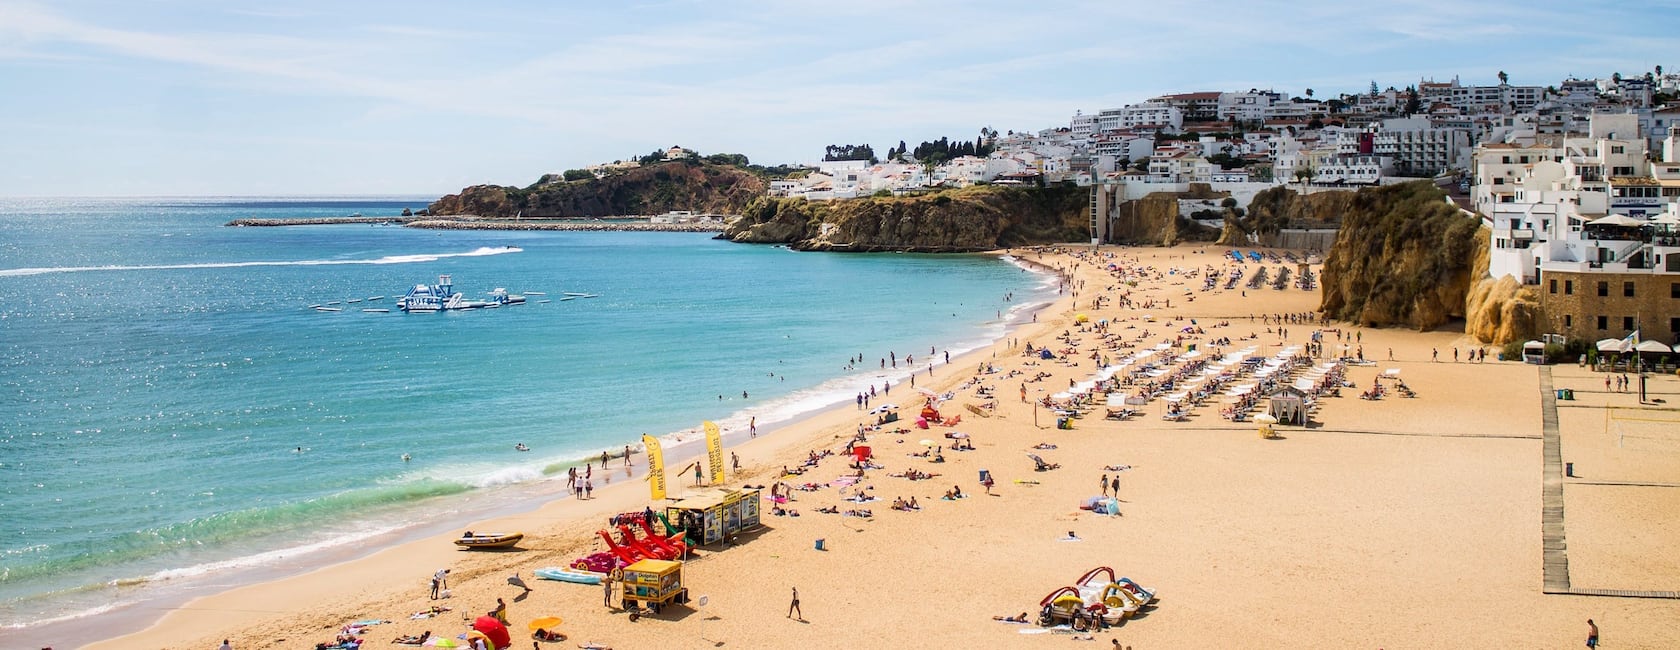 Holiday rentals in Albufeira